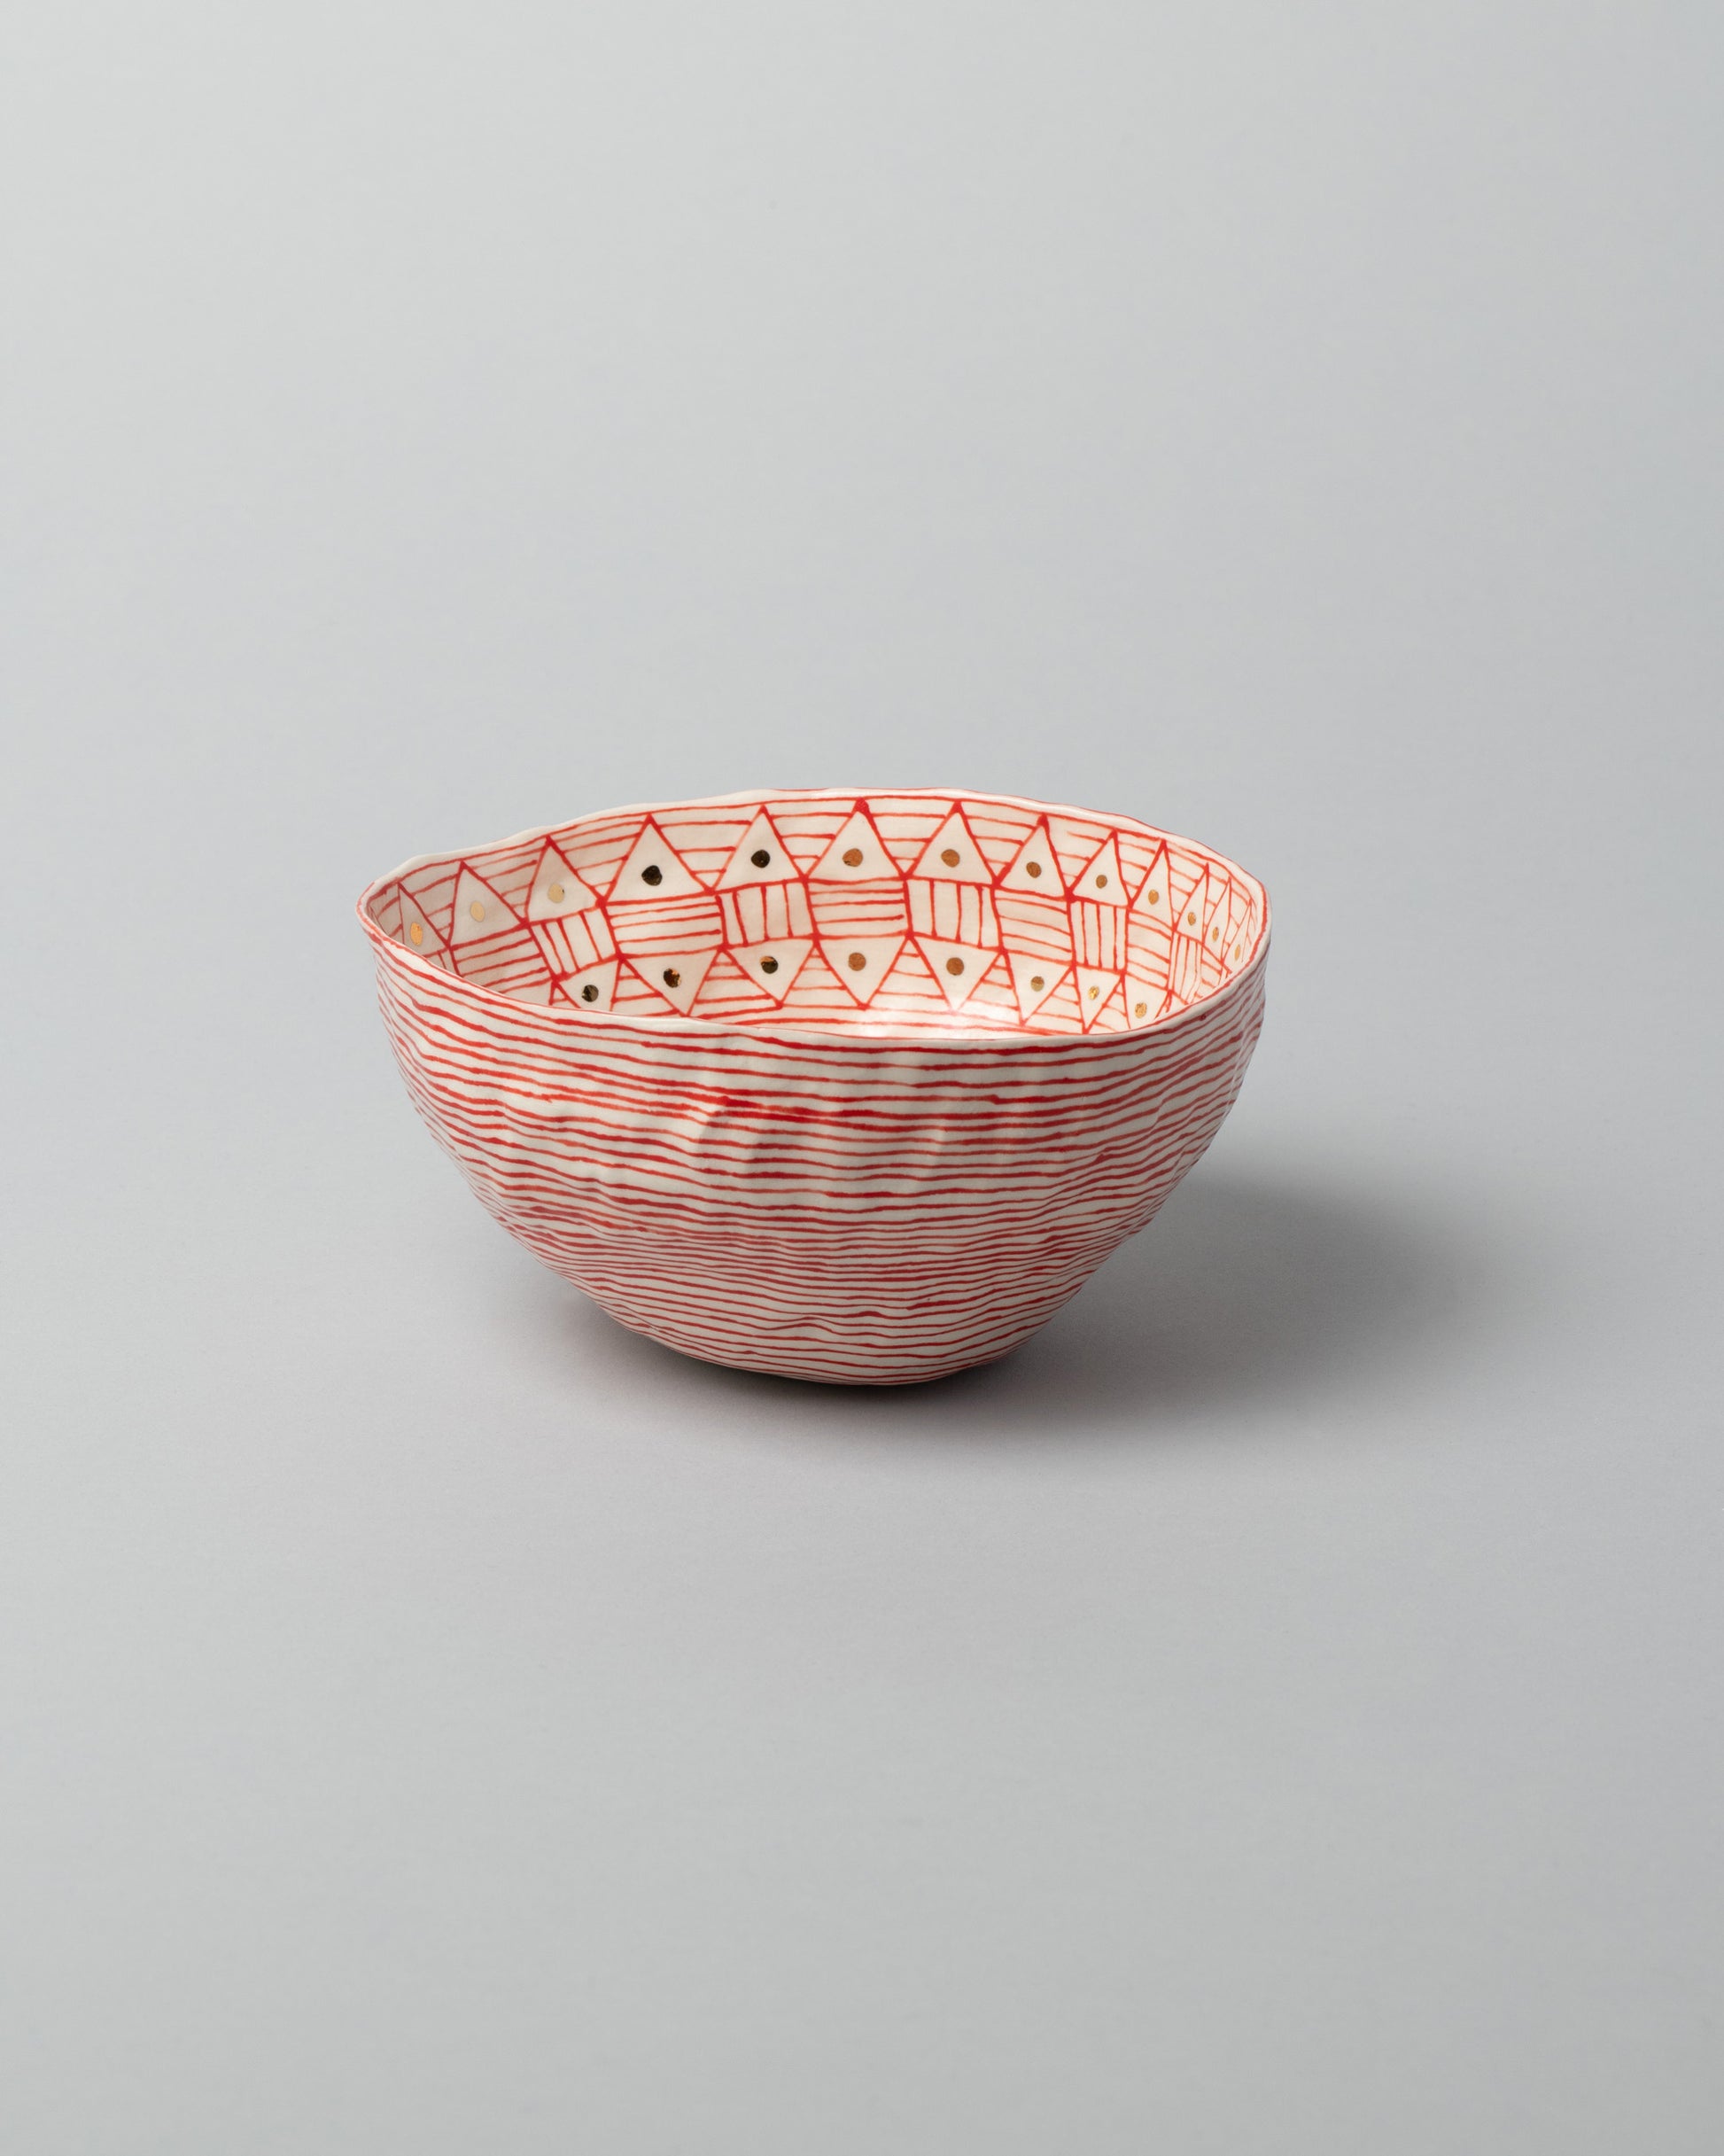 Suzanne Sullivan One Pinch Bowl on light color background.